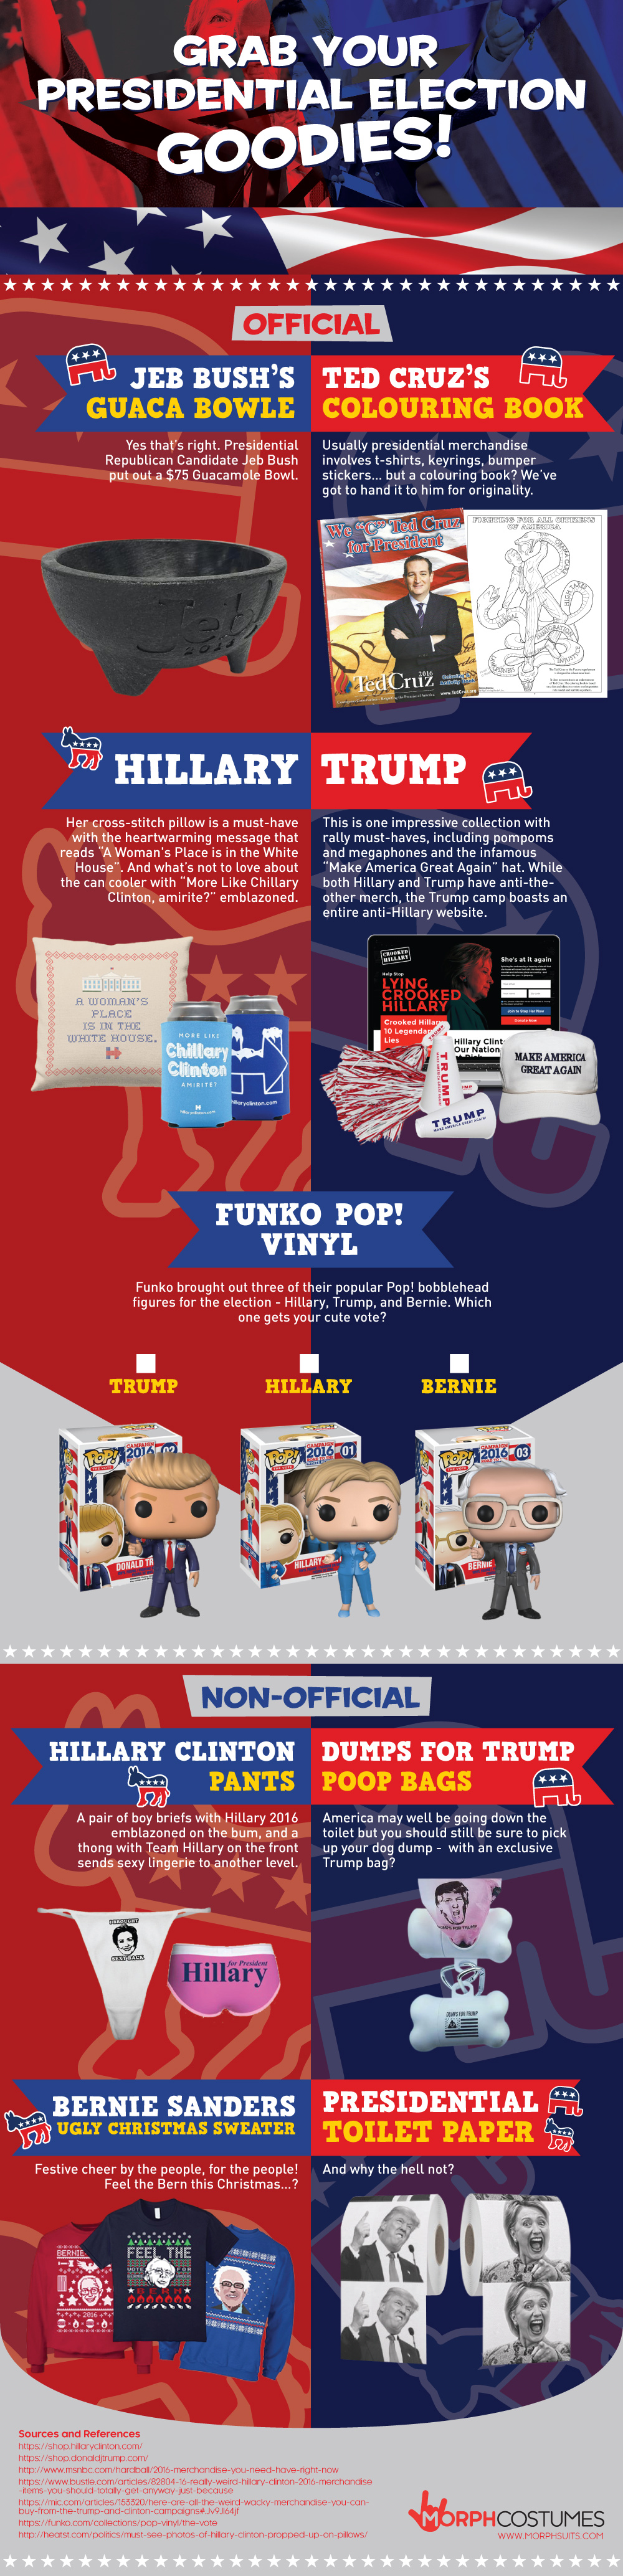 Grab your 2016 US Presidential Election Goodies!